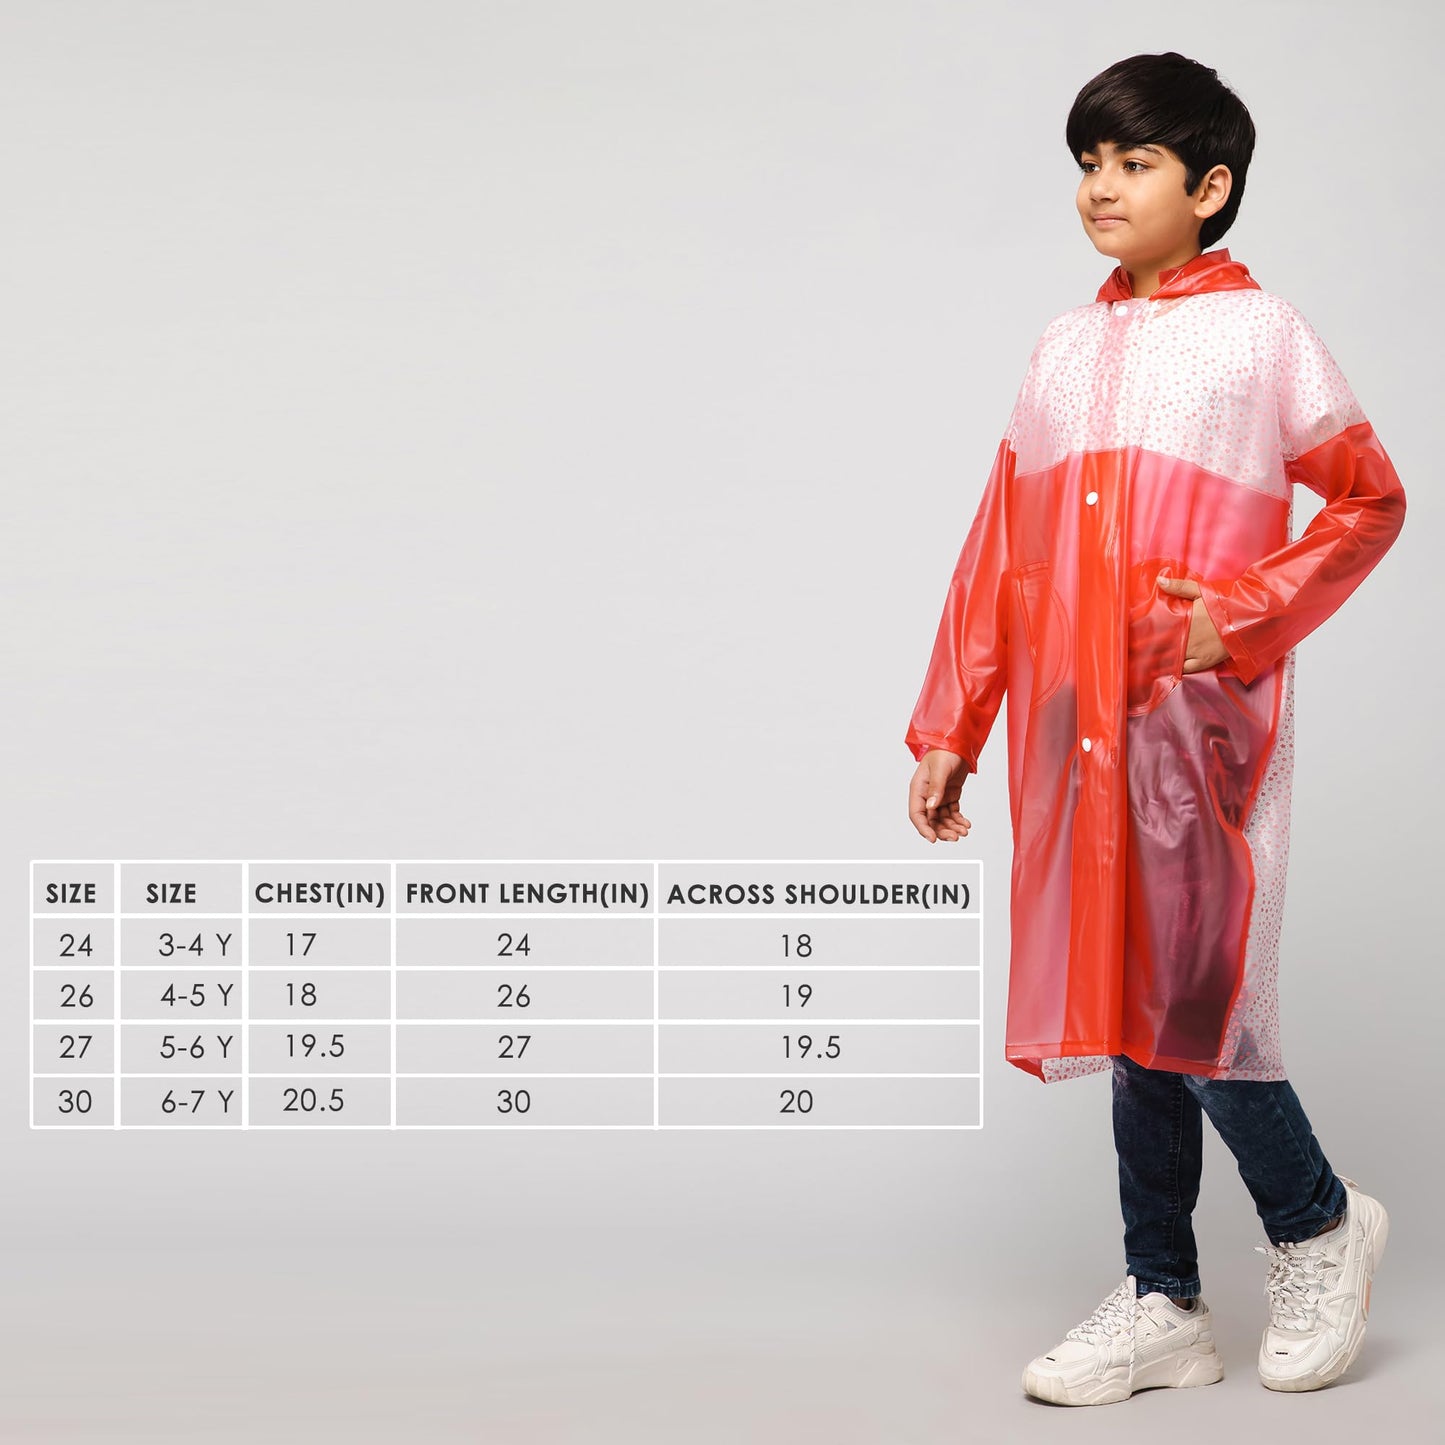 THE CLOWNFISH Drip Dude Series Unisex Kids Waterproof Single Layer PVC Longcoat/Raincoat with Adjustable Hood. Age-5-6 Years (Rose Red)